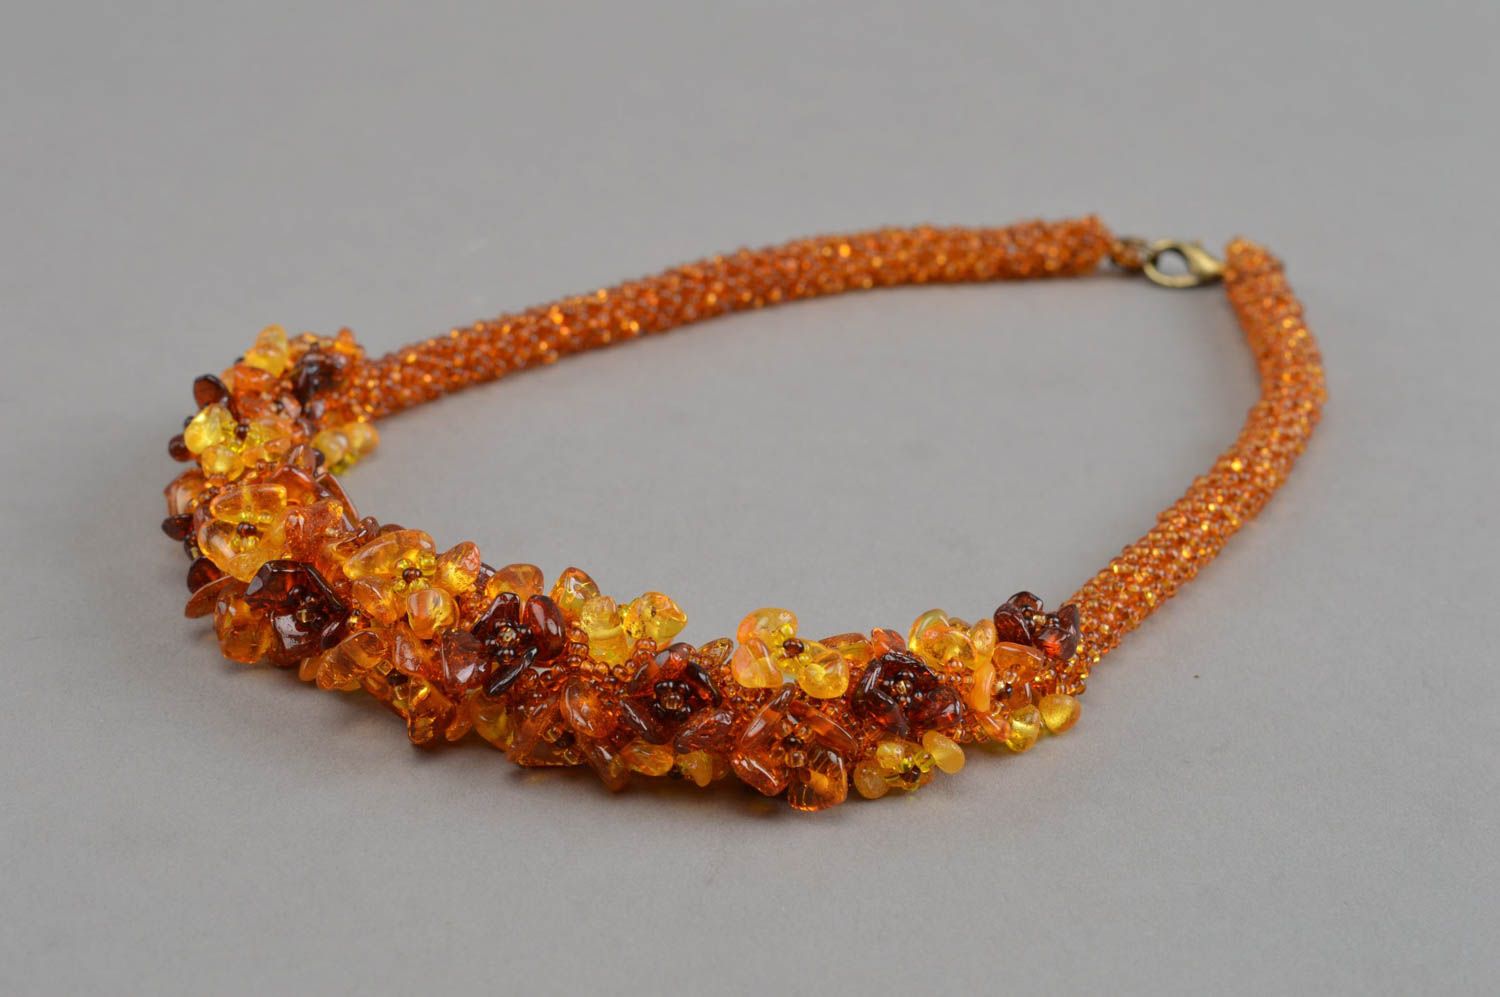 Amber necklace with beads handmade designer accessory made of natural stones photo 4